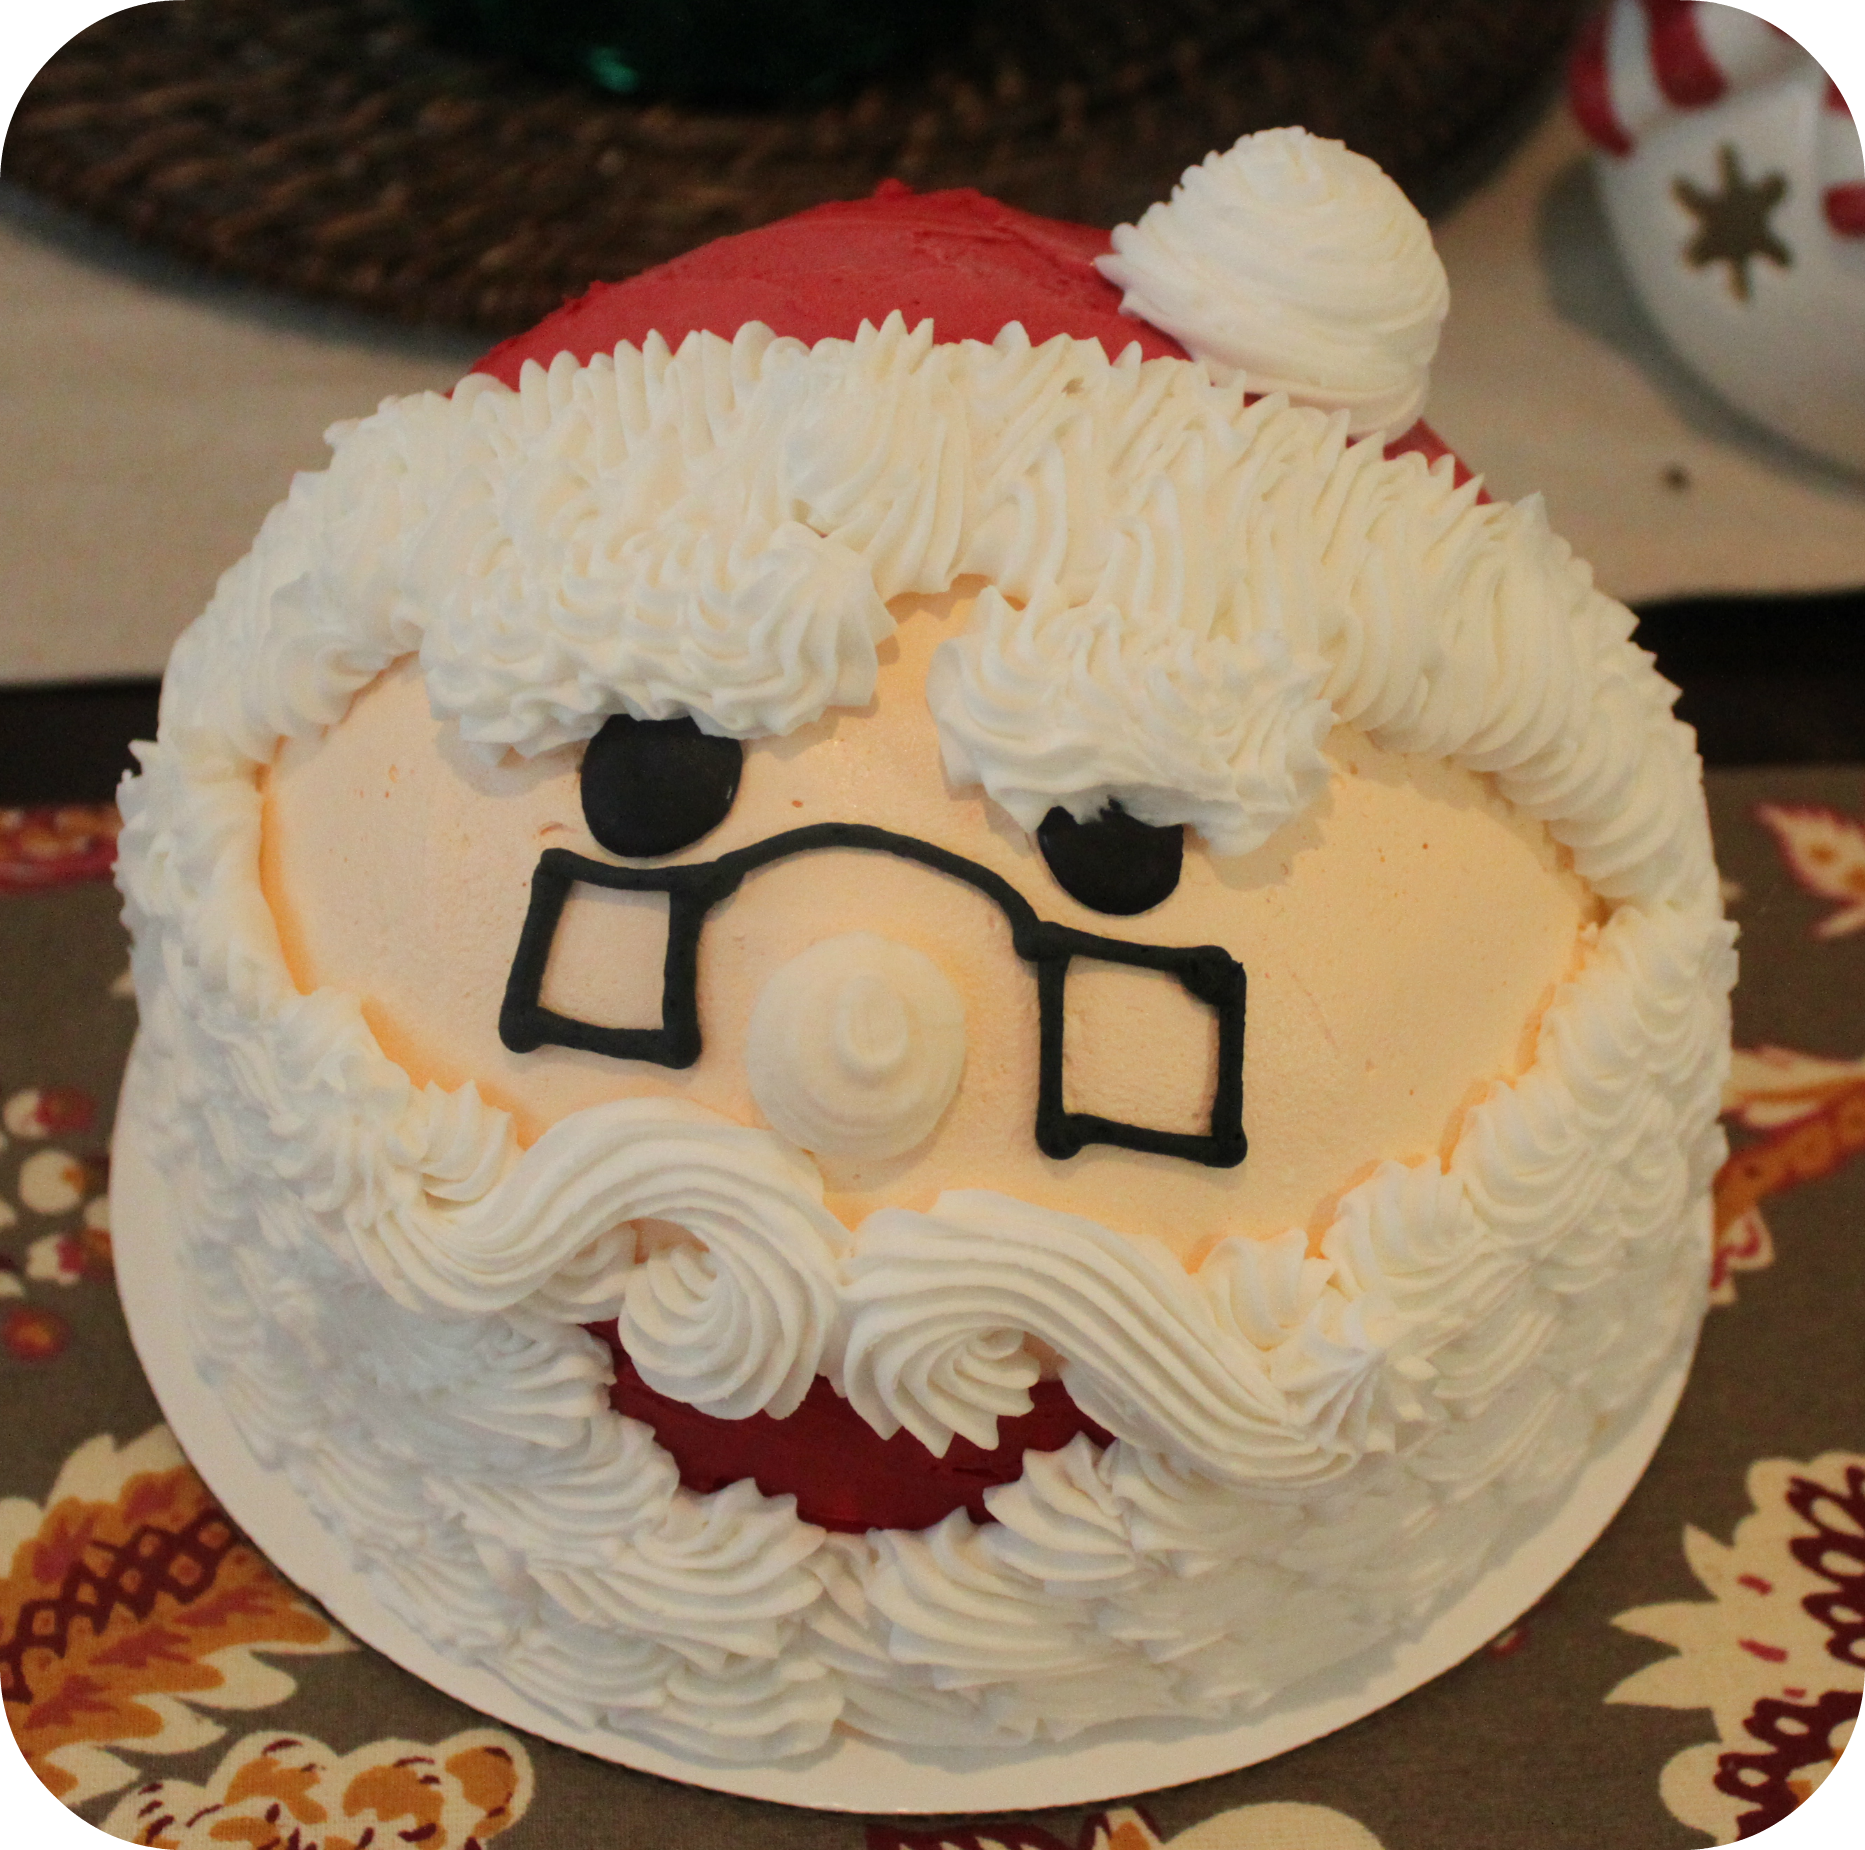 Baskin Robbins Holiday Ice Cream Cakes » The Denver Housewife